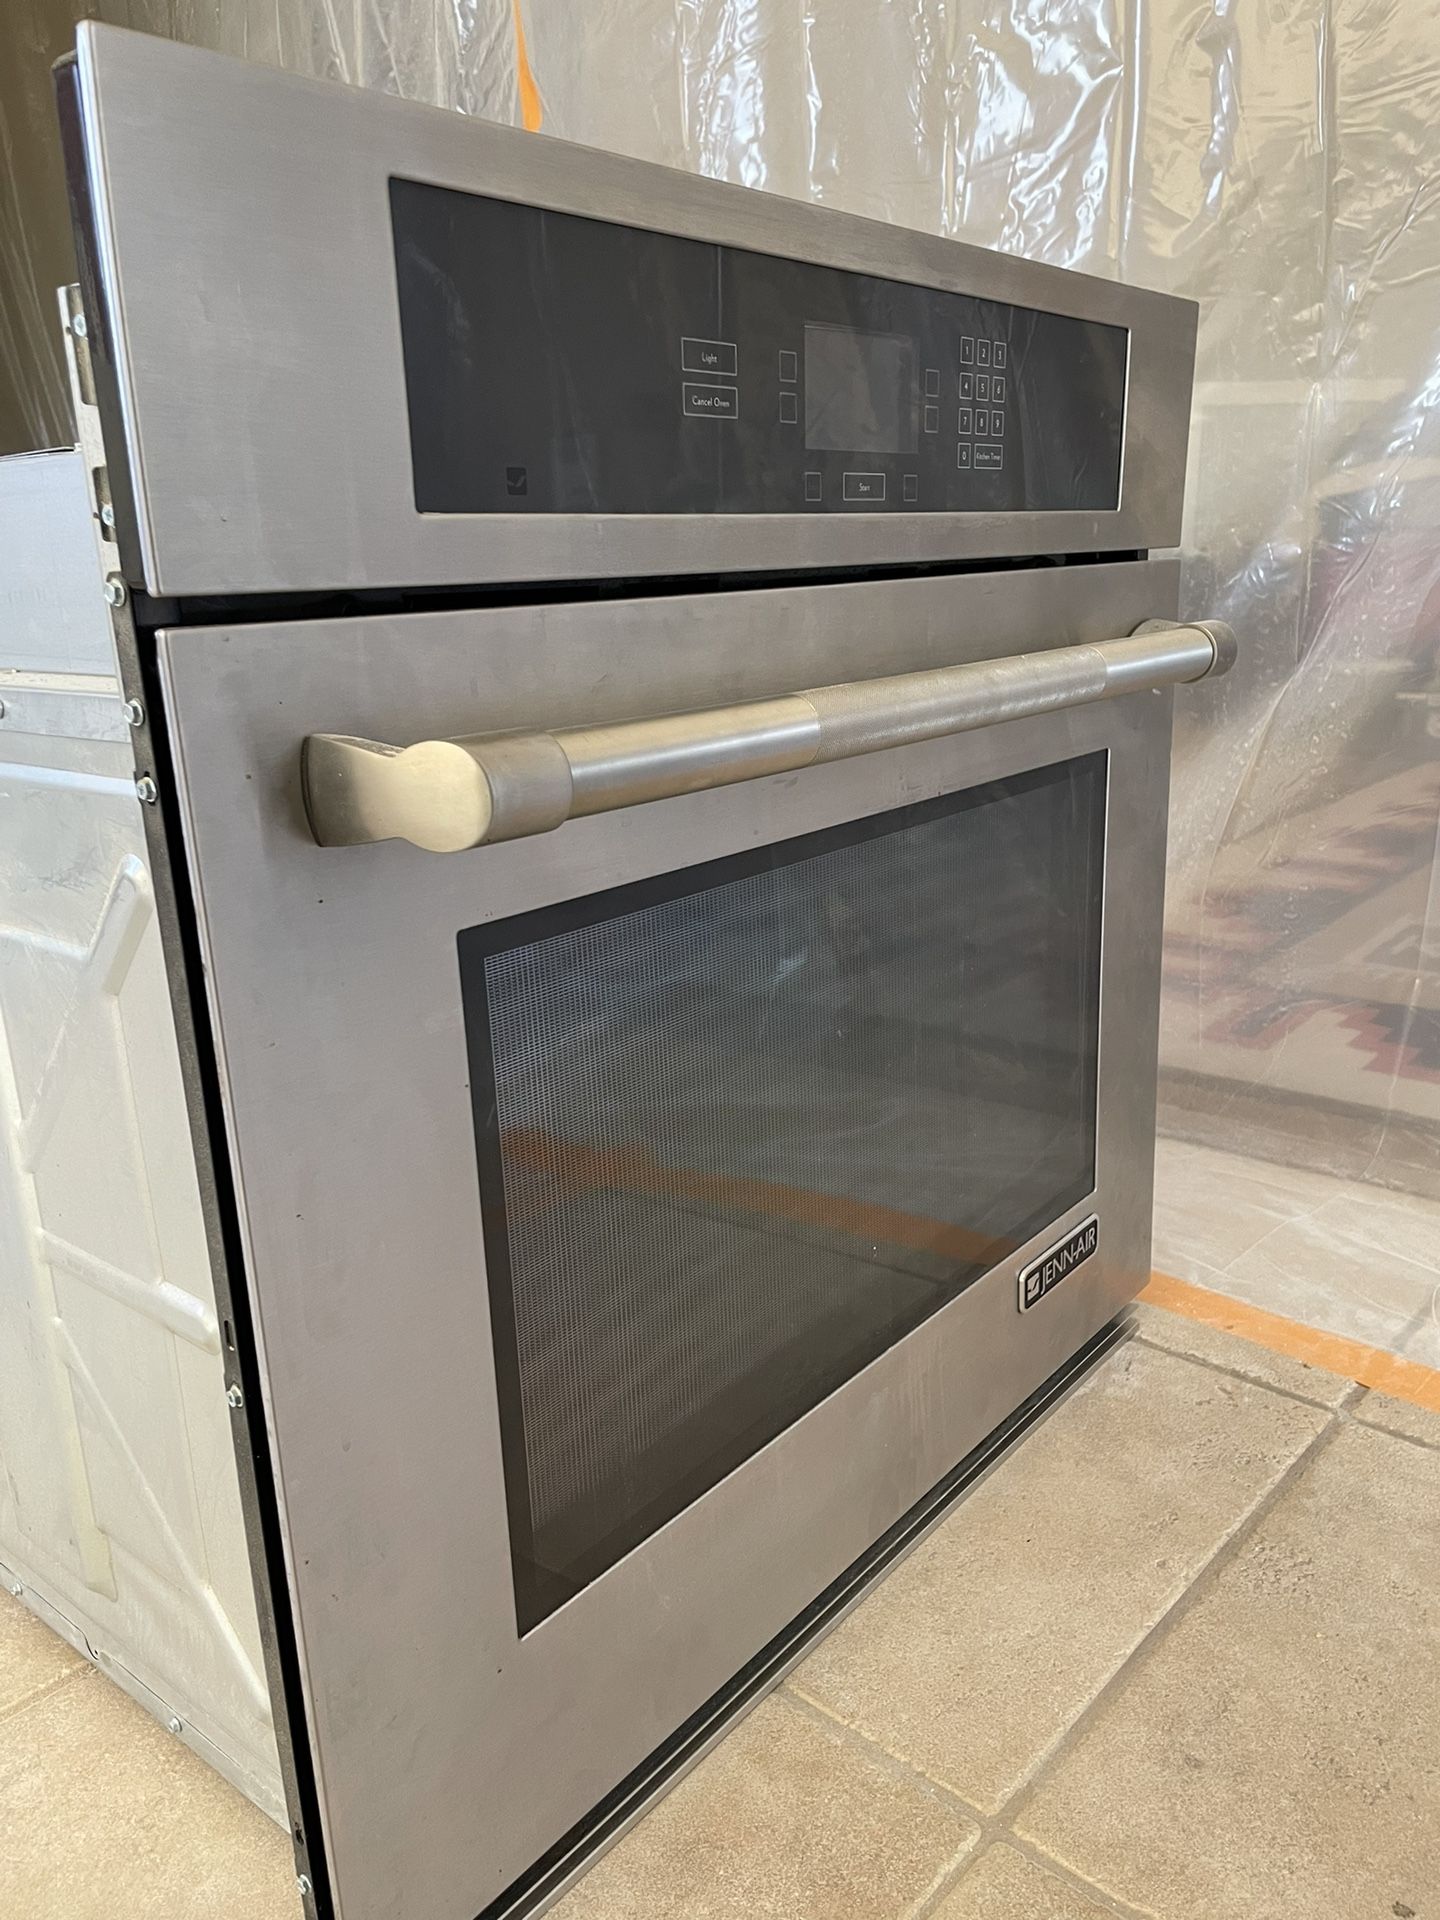 Jenn-Air Wall Oven  - Excellent Condition jjw2430wp02 